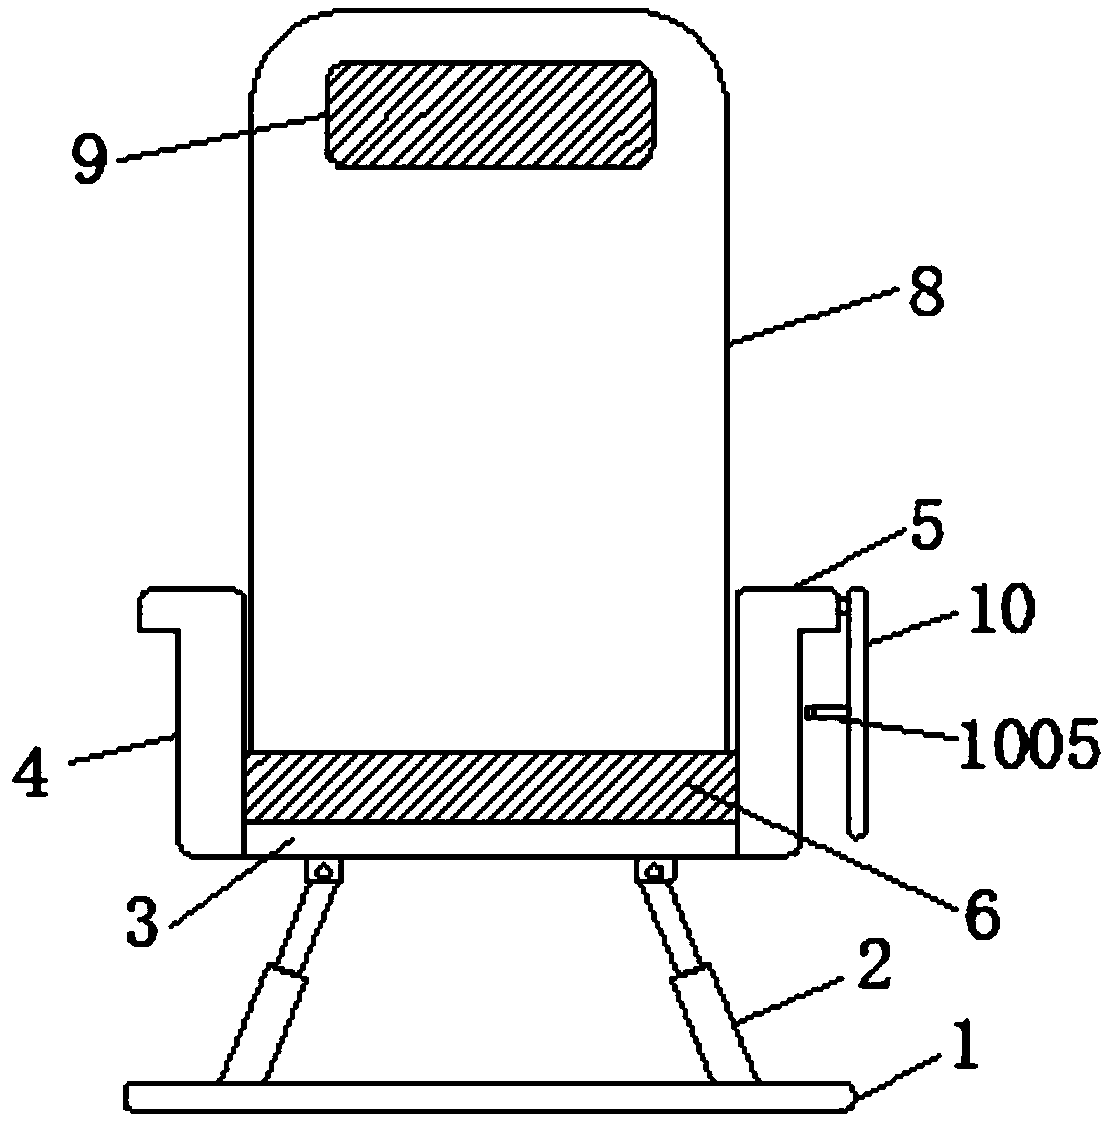 An adjusting device for an aircraft lumen adjusting chair